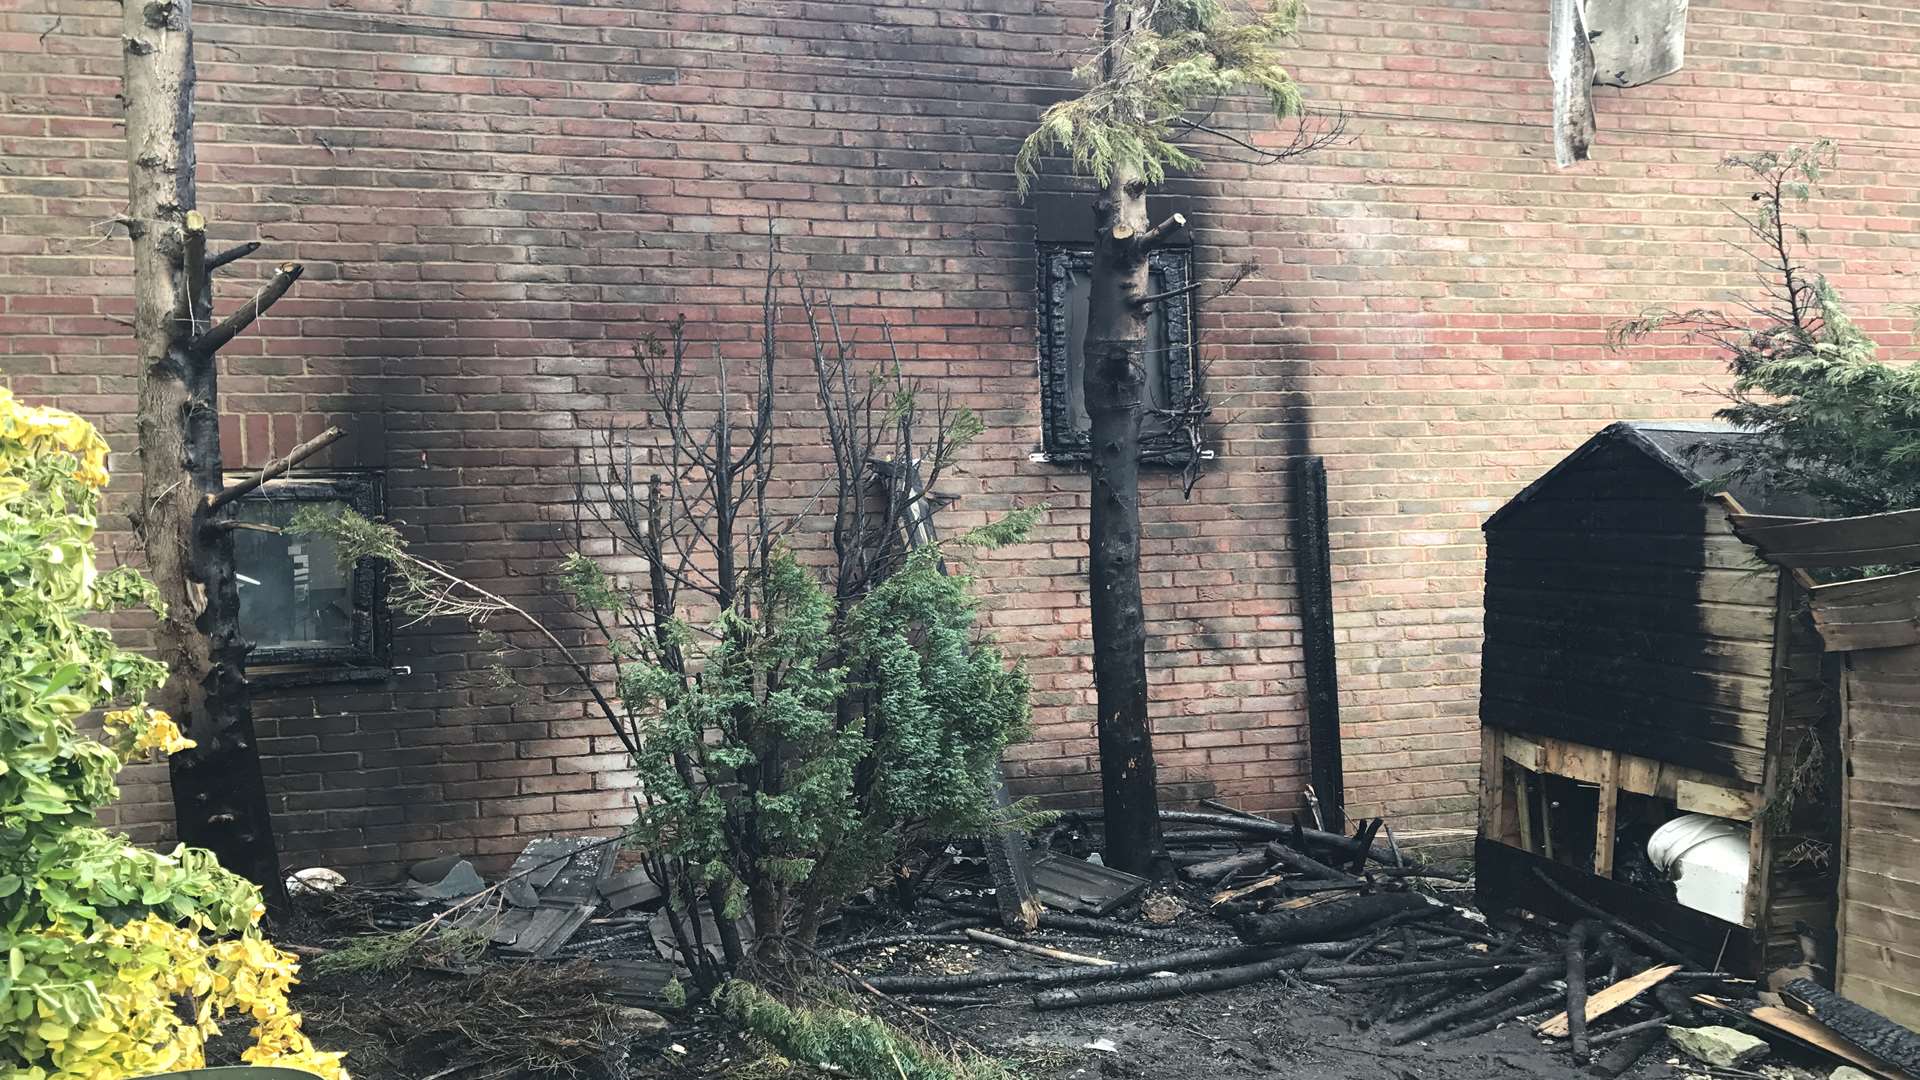 The fire damaged garden and house